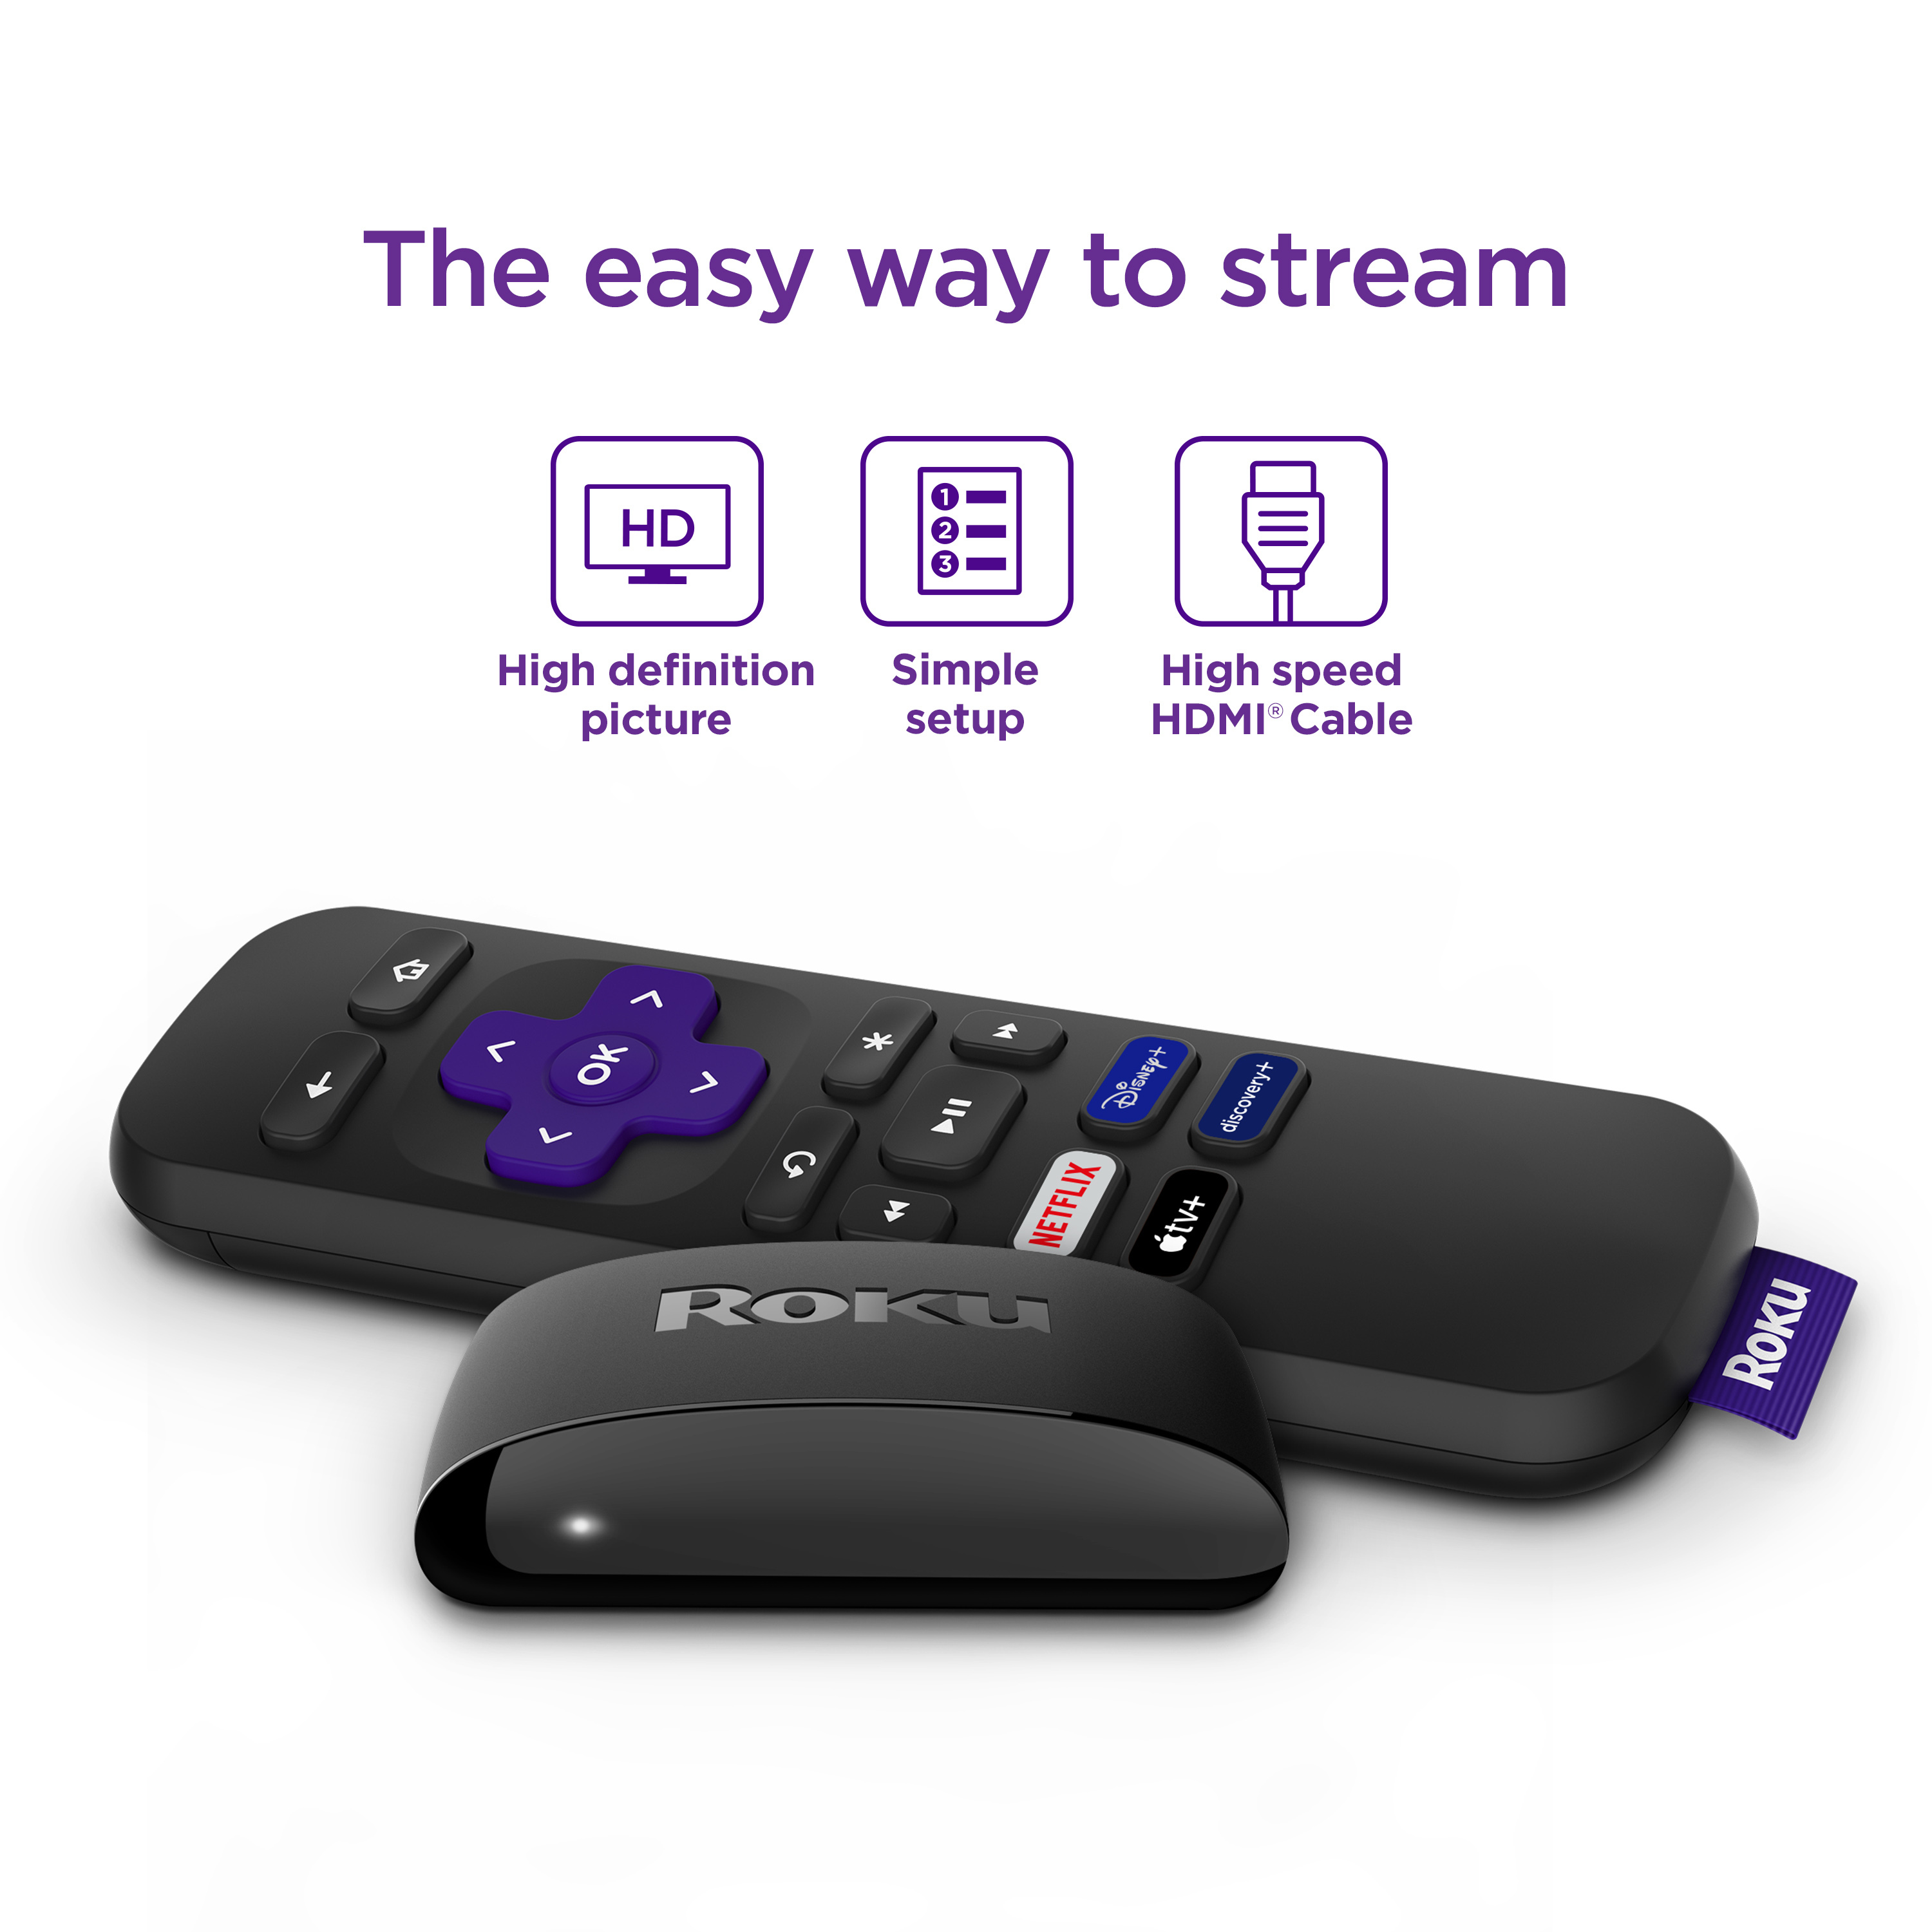 Roku Express 2019 | HD Streaming Media Player with High Speed HDMI Cable and Simple Remote - image 3 of 12